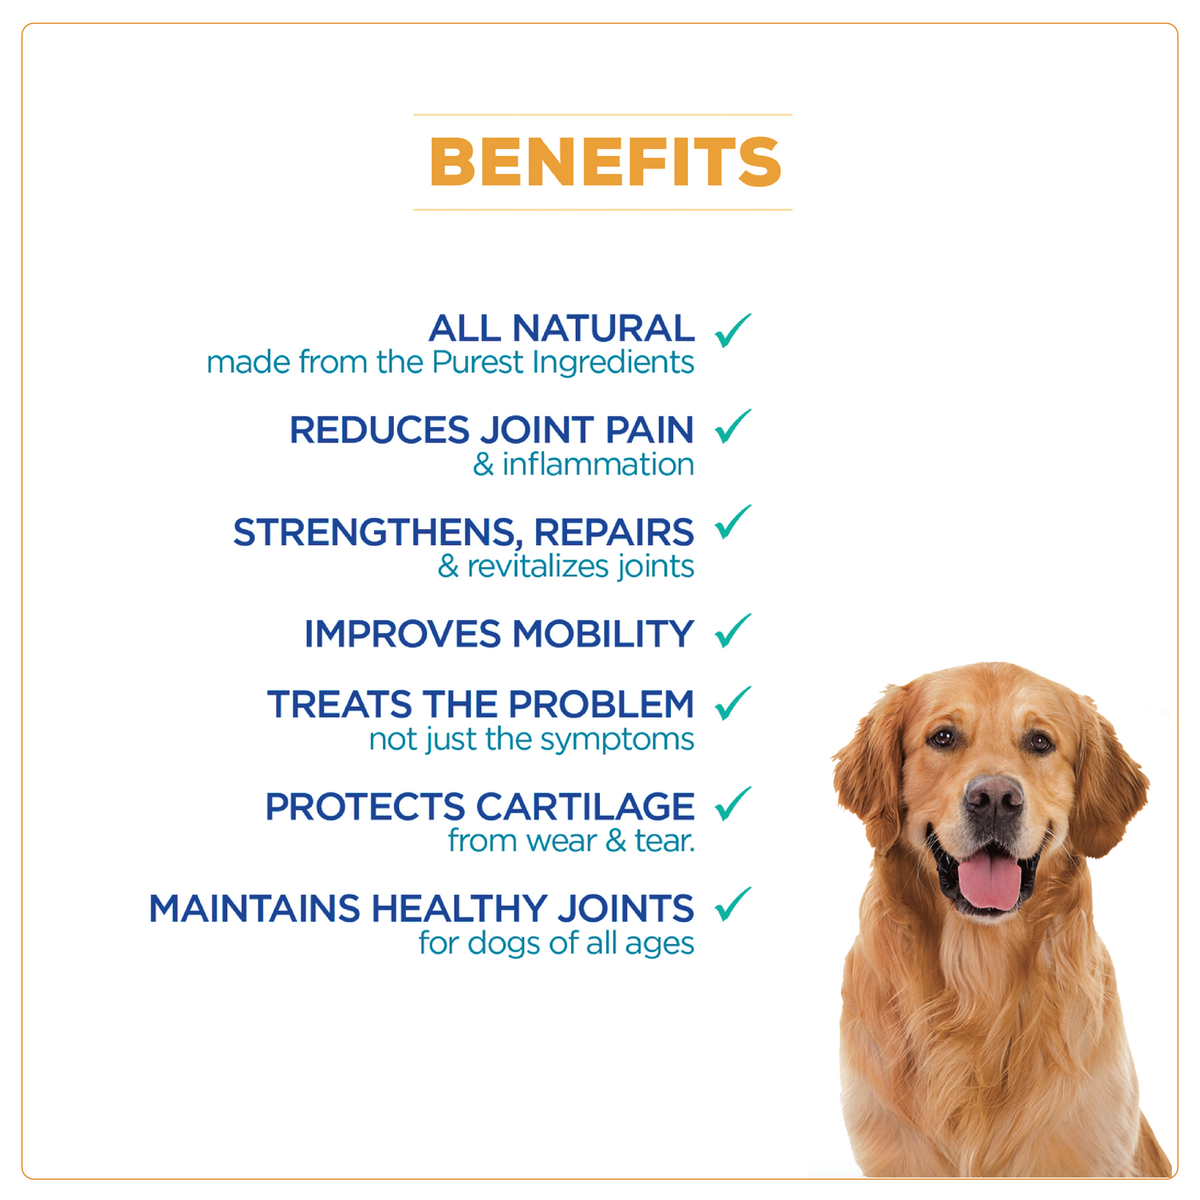 benefits of WagWorthy Naturals hip and joint supplement for dogs